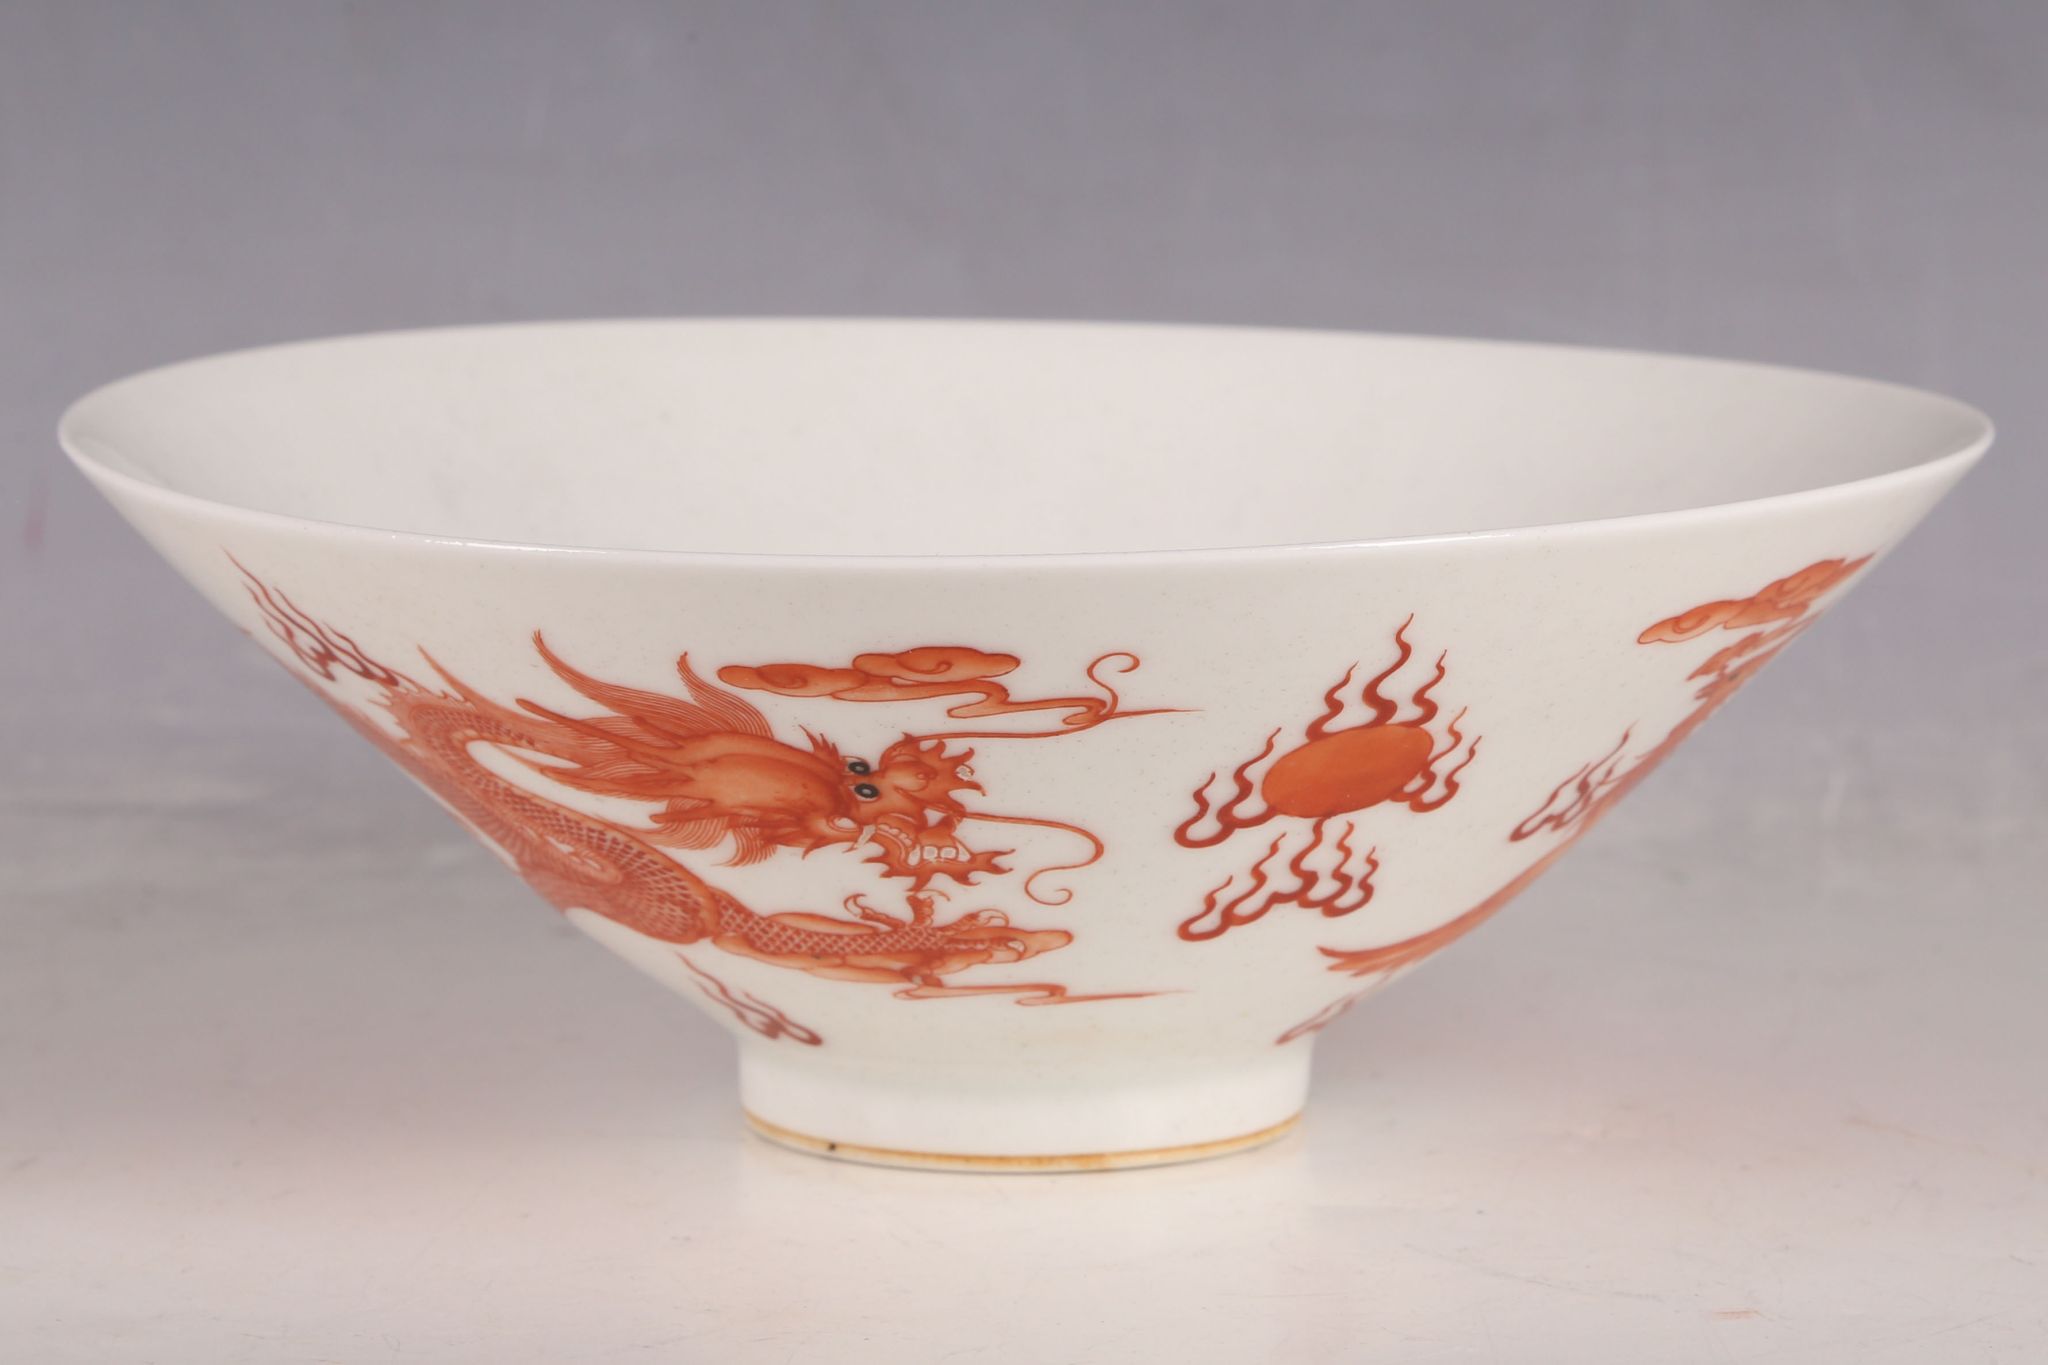 A Chinese 20th Century porcelain pedestal flared bowl, painted outside in iron red glazes with a